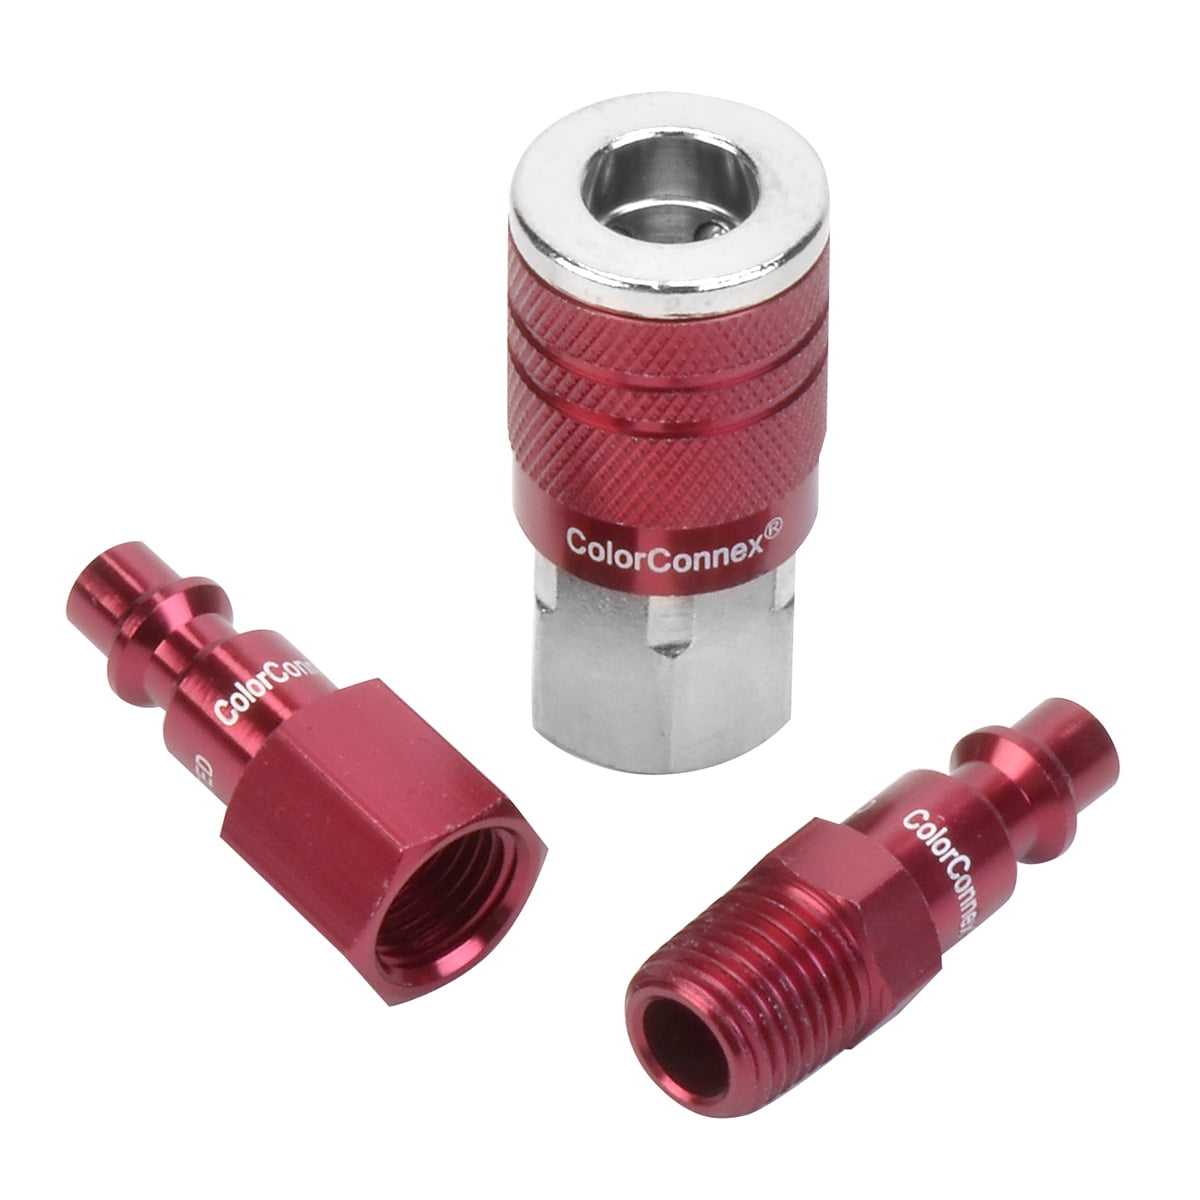 ColorConnex Coupler Plug Kit Type D 1 4in NPT 1 4in Body Red 5 PC for sale online 